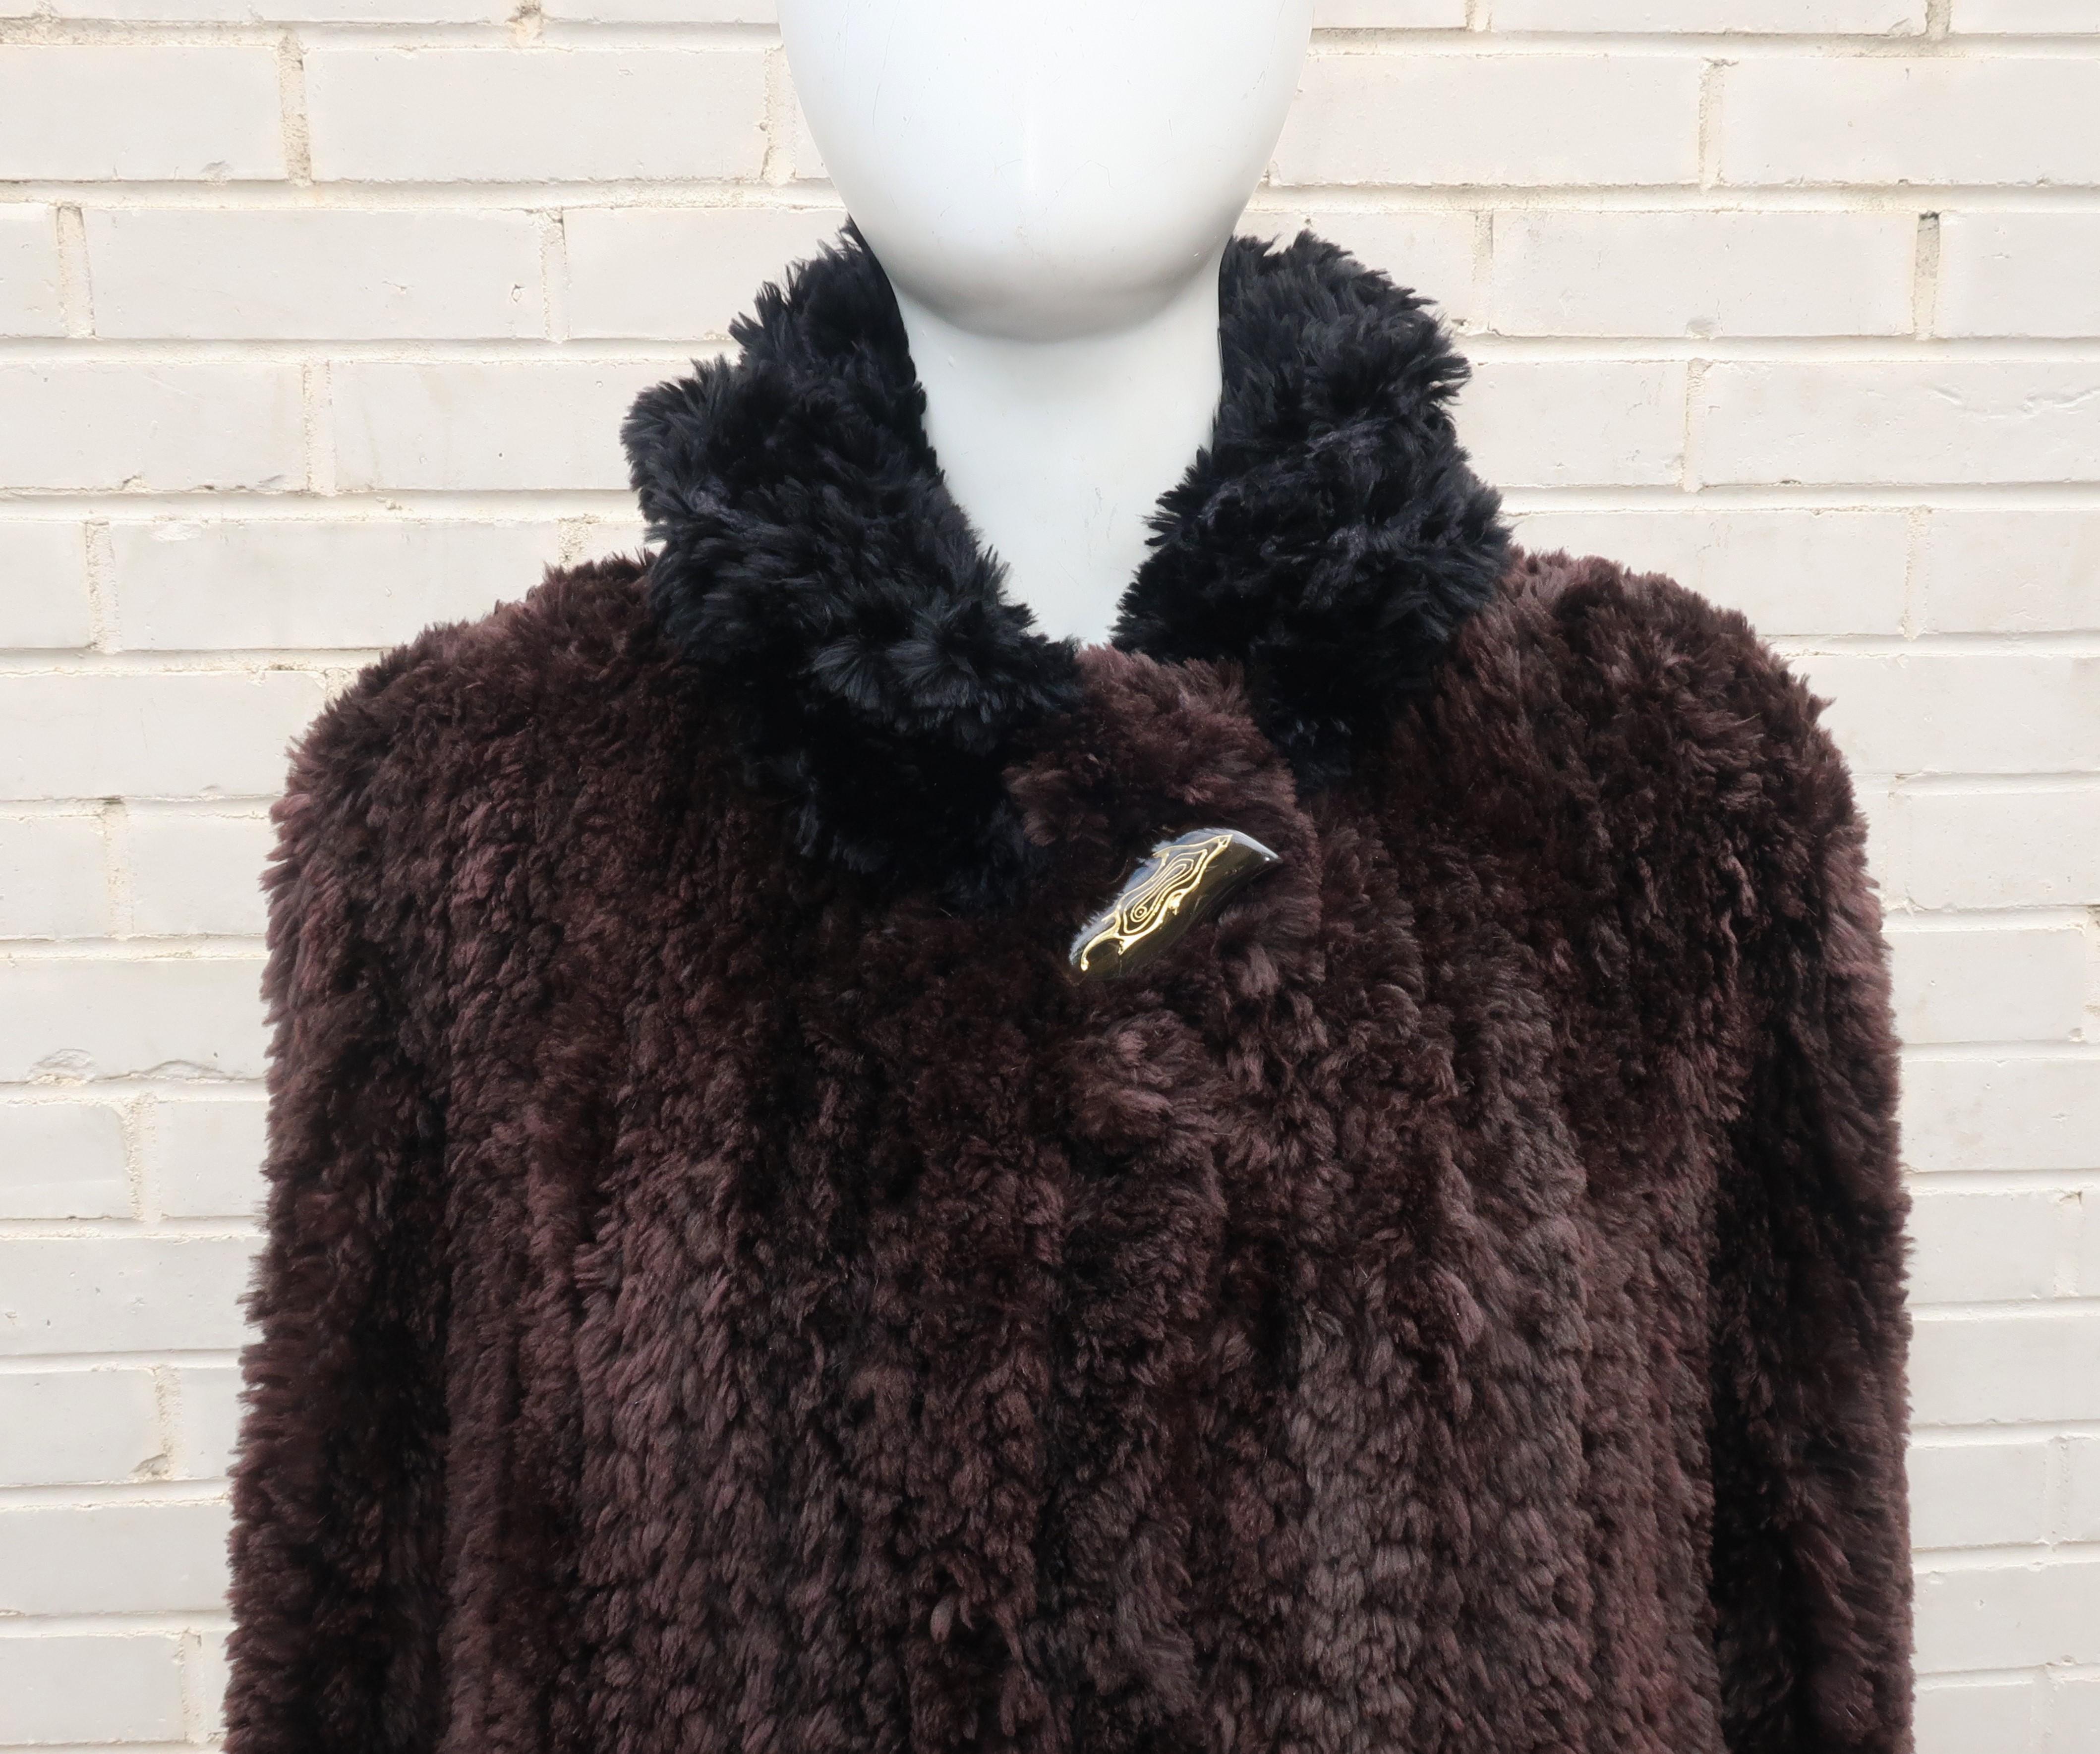 Canadian fur designer, Paula Lishman, has been working with artisans for decades to perfect a unique fur 'fabric' by combining a cotton yarn with fur which can then be used to create comfortable garments that appeal to stylish active women.  This